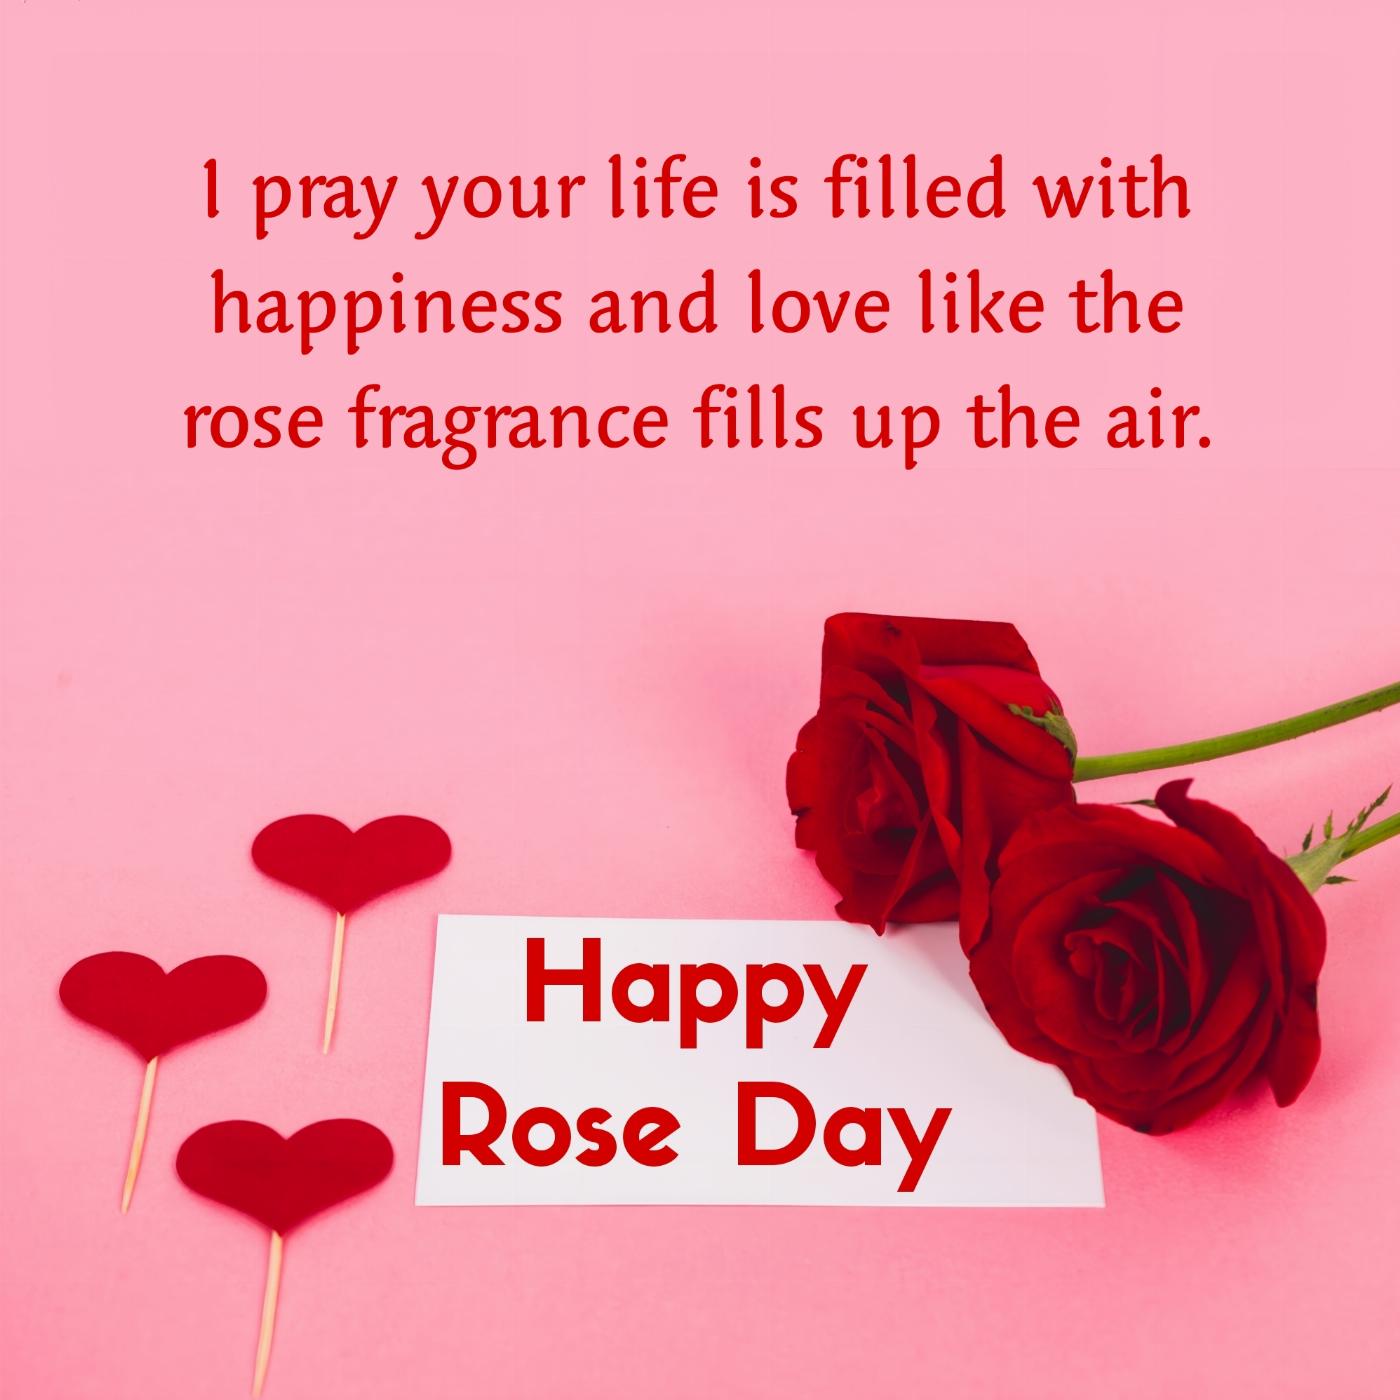 I pray your life is filled with happiness and love like the rose fragrance